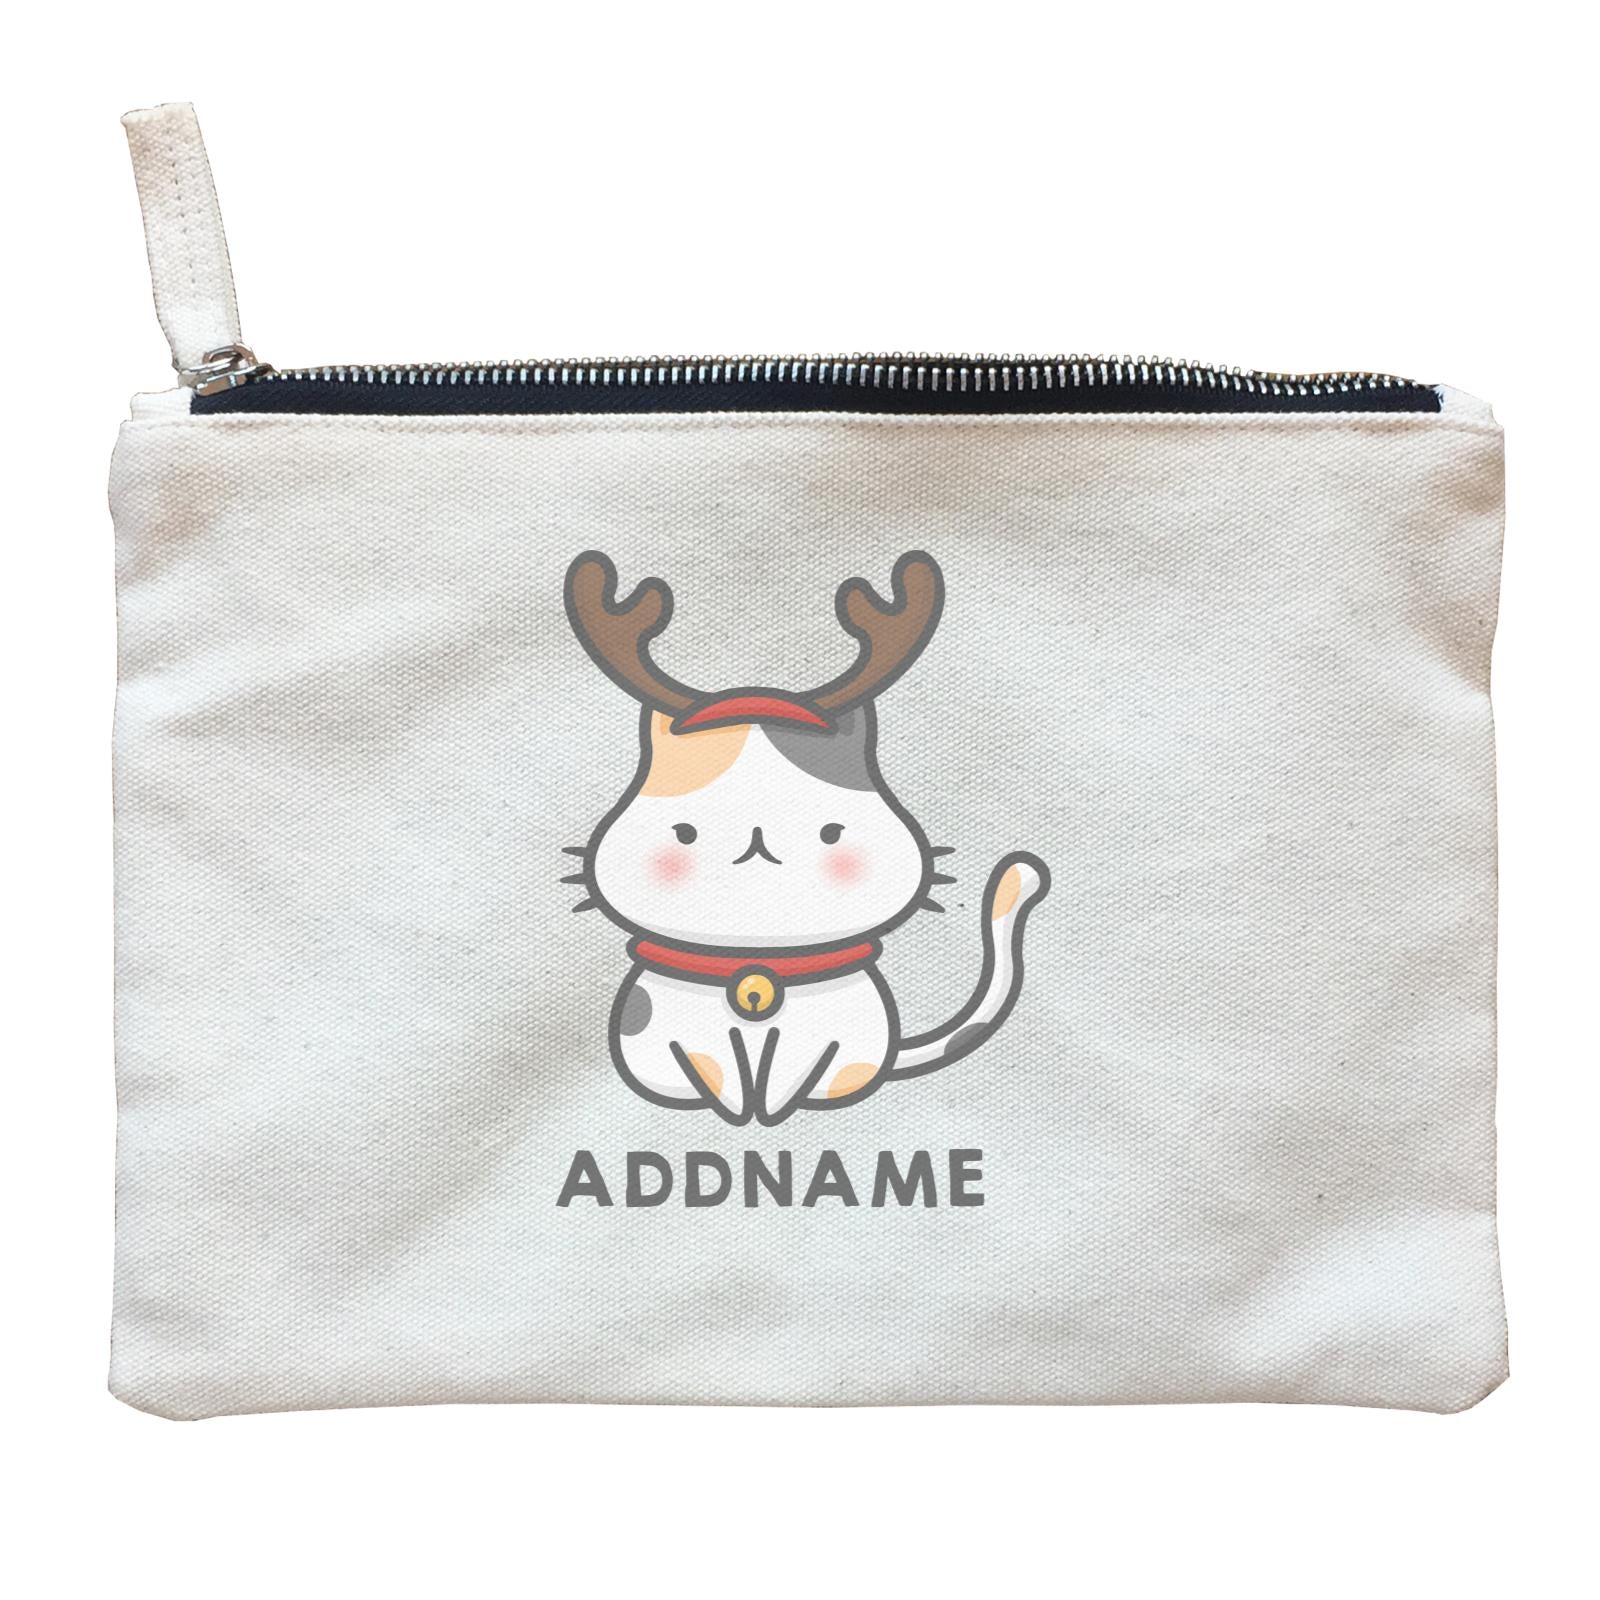 Xmas Cute Cat With Reindeer Antlers Addname Accessories Zipper Pouch